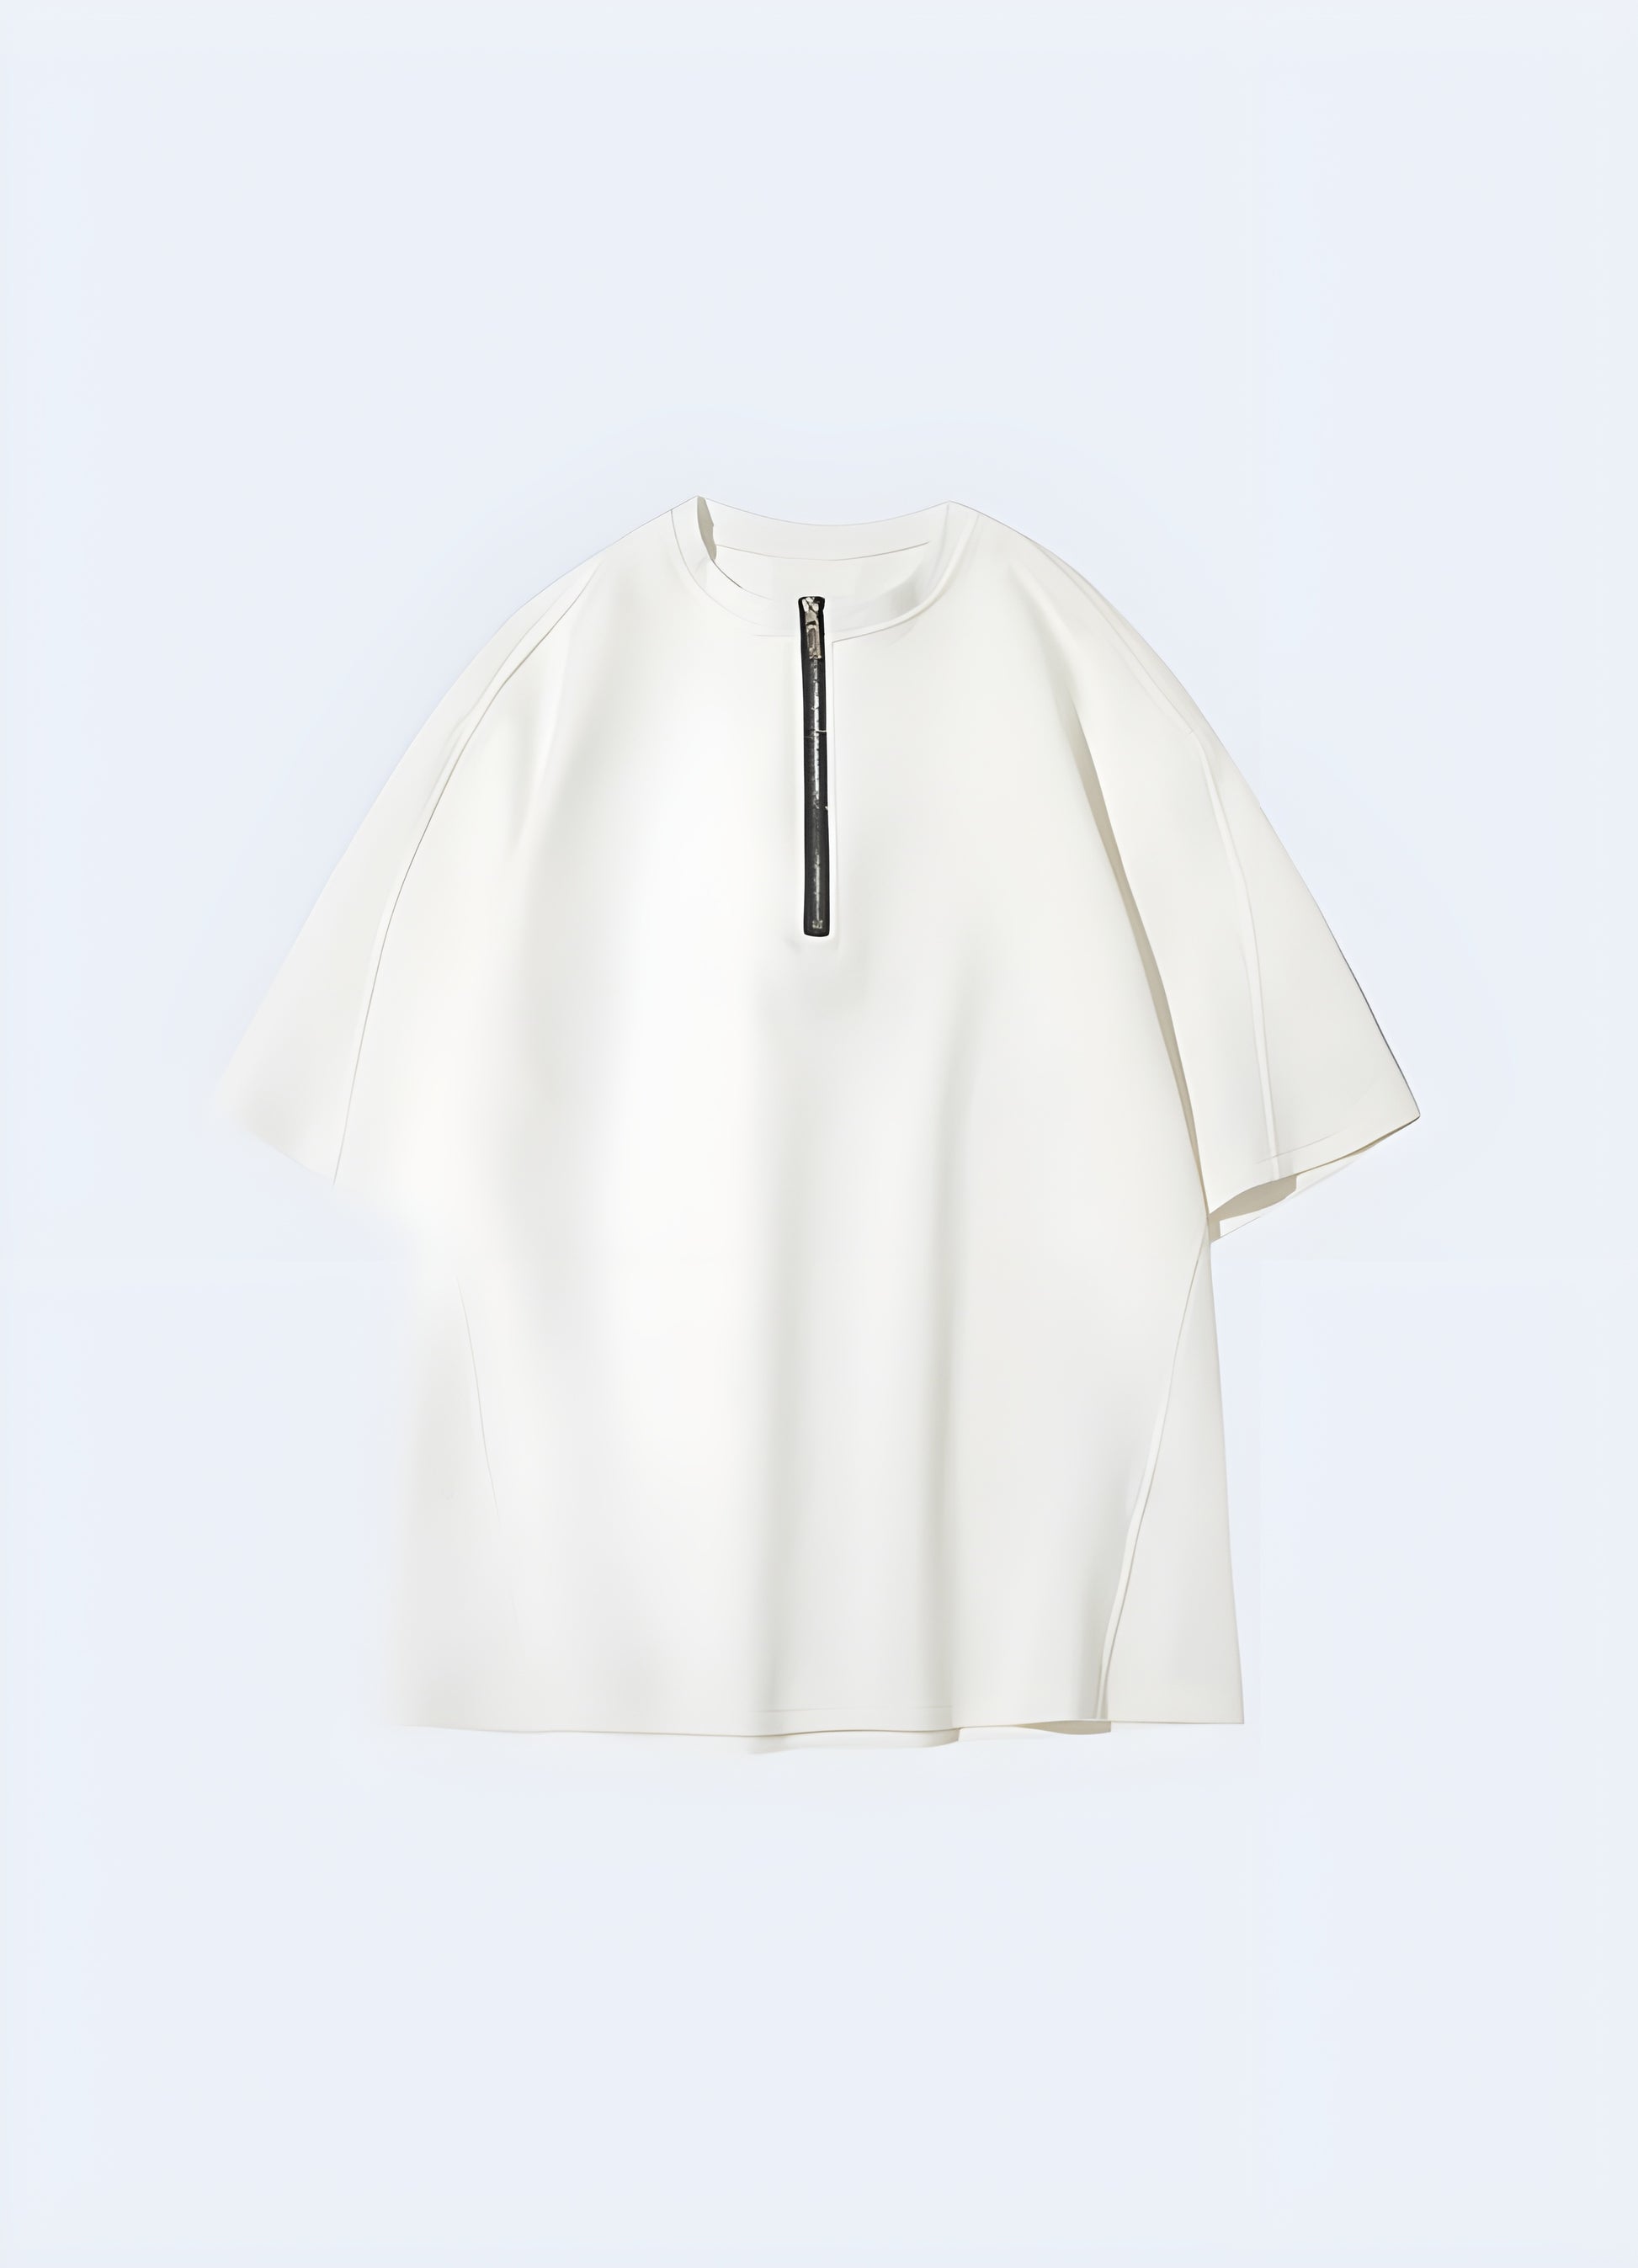 Unleash the embodiment of elegant versatility with our exclusive short sleeve zipper shirt.